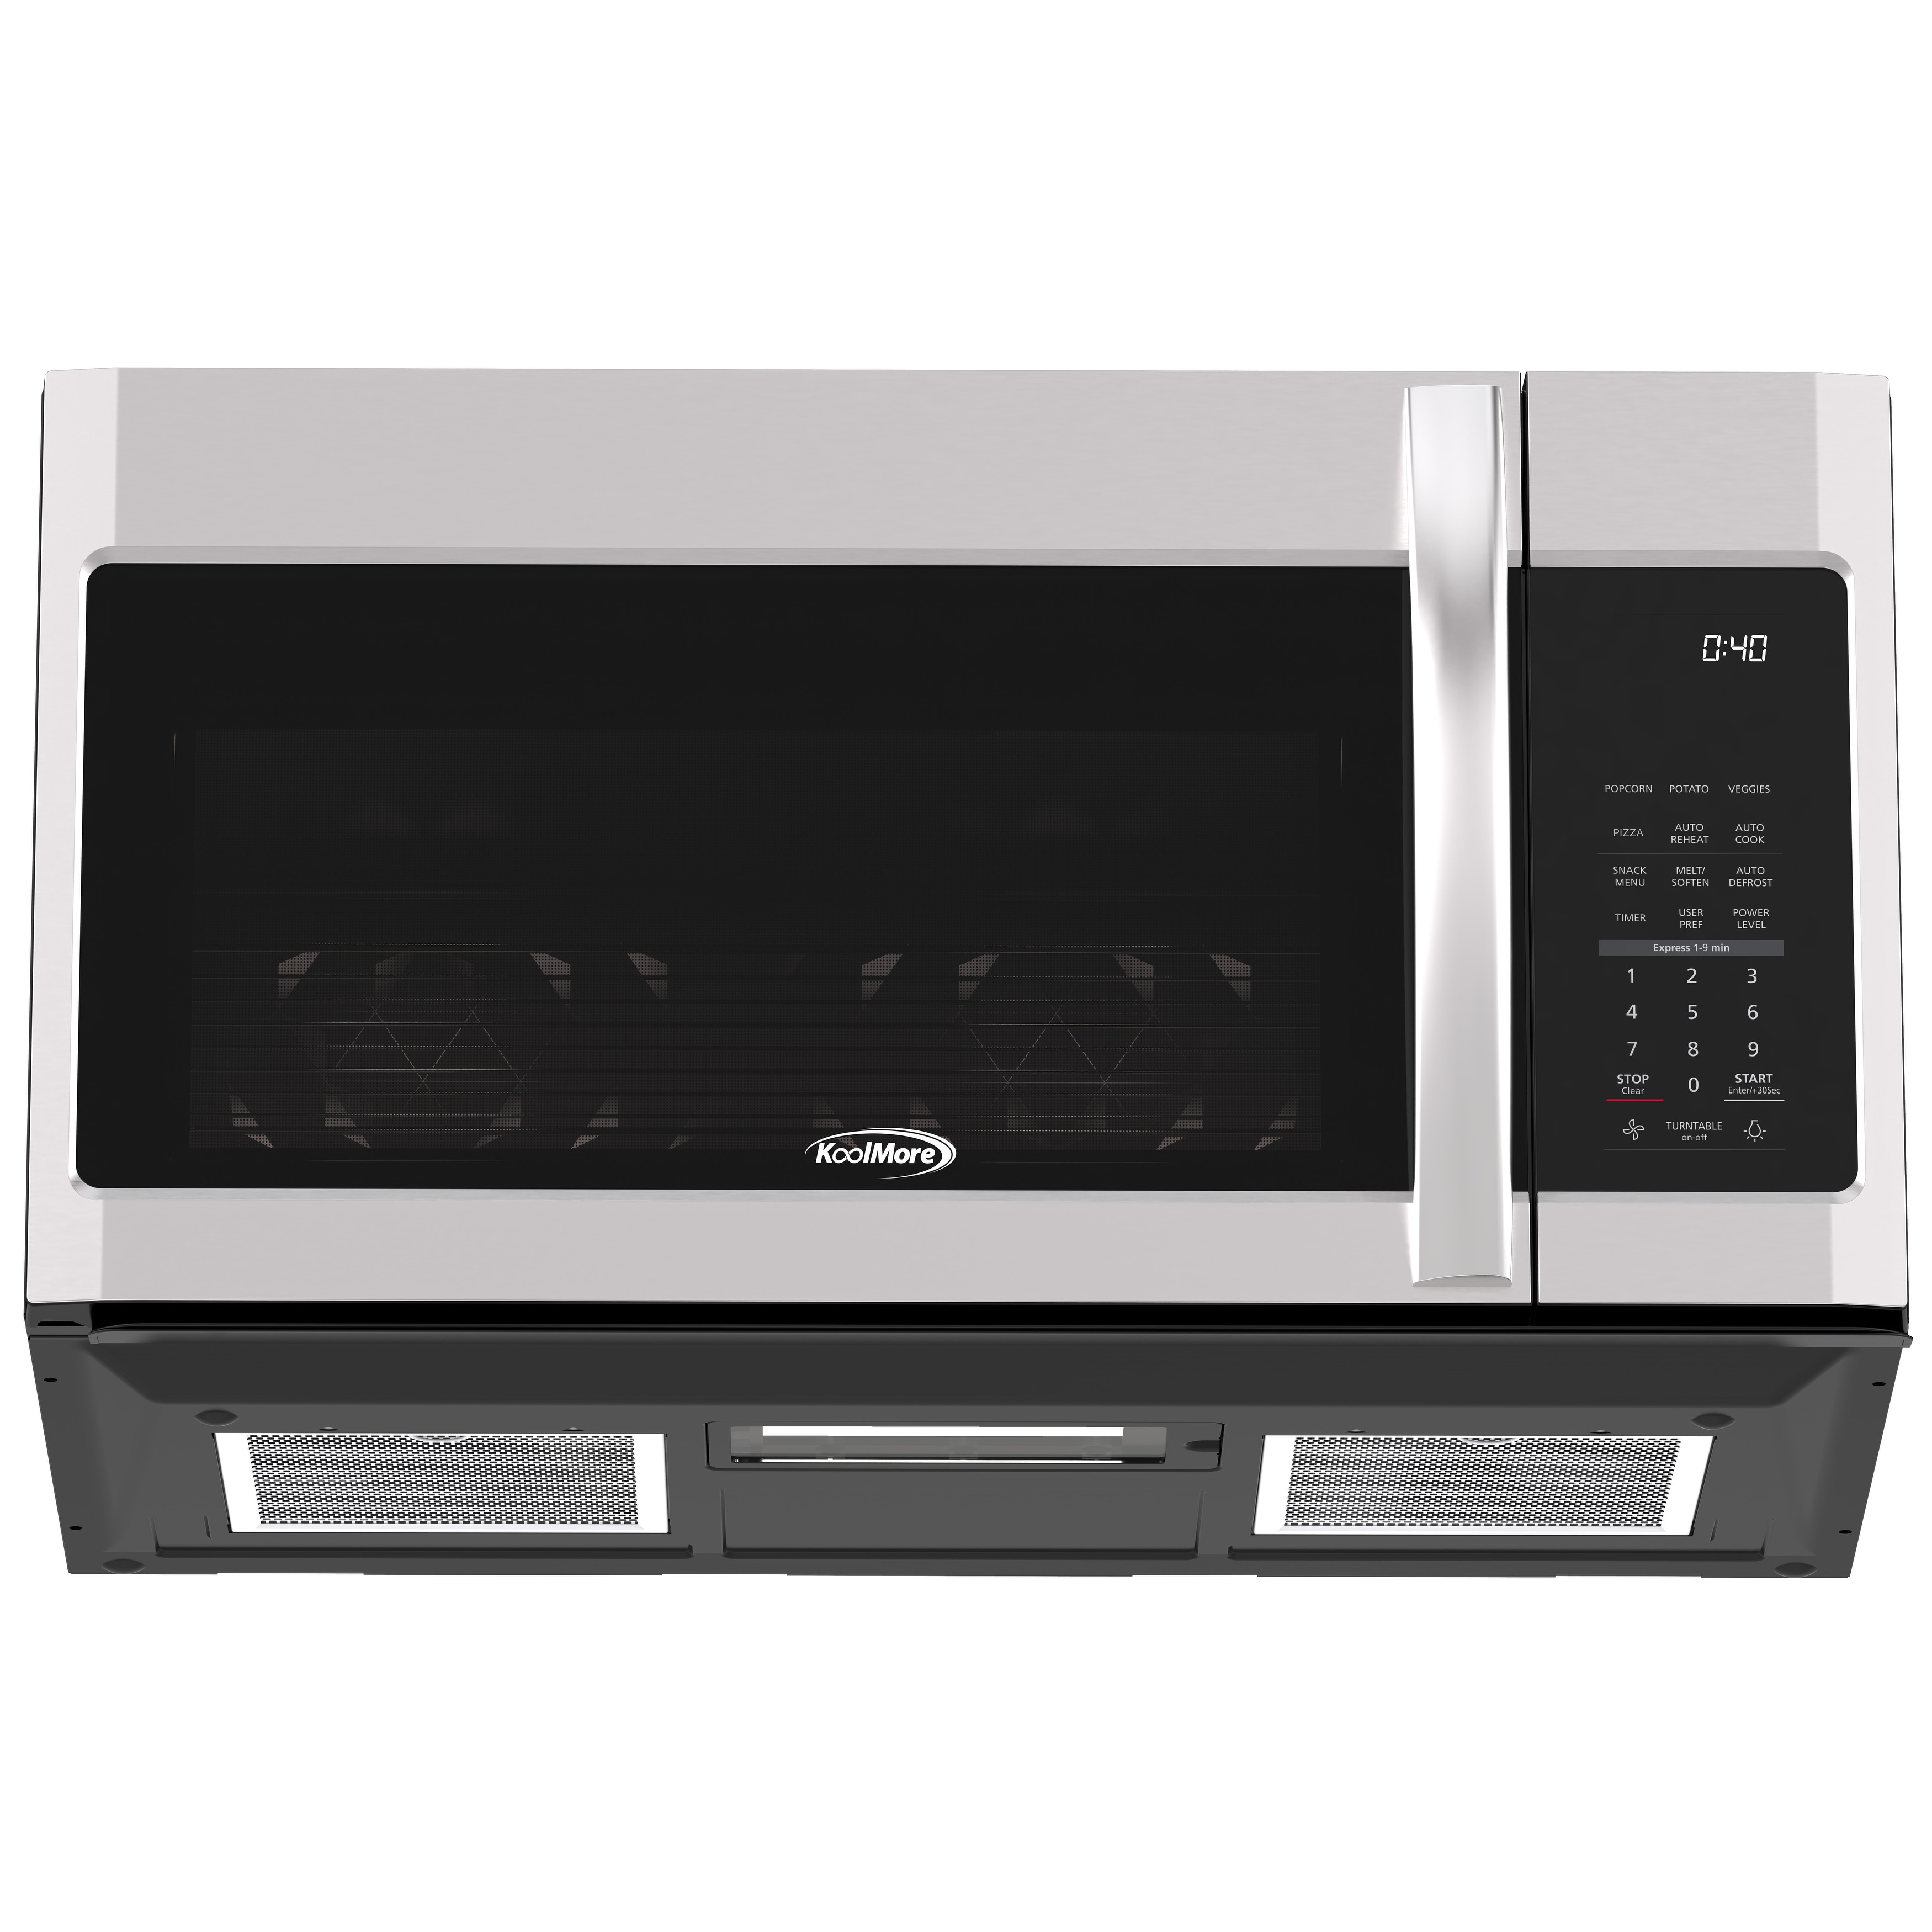 https://ak1.ostkcdn.com/images/products/is/images/direct/80189aa63f3527e06956f1dbe0d7e6043a008d81/1.9-Cu.-Ft.-Over-the-Range-Microwave-Oven-with-Oven-Lamp-and-300CFM-Recirculation-Vent-Hood-Function.jpg